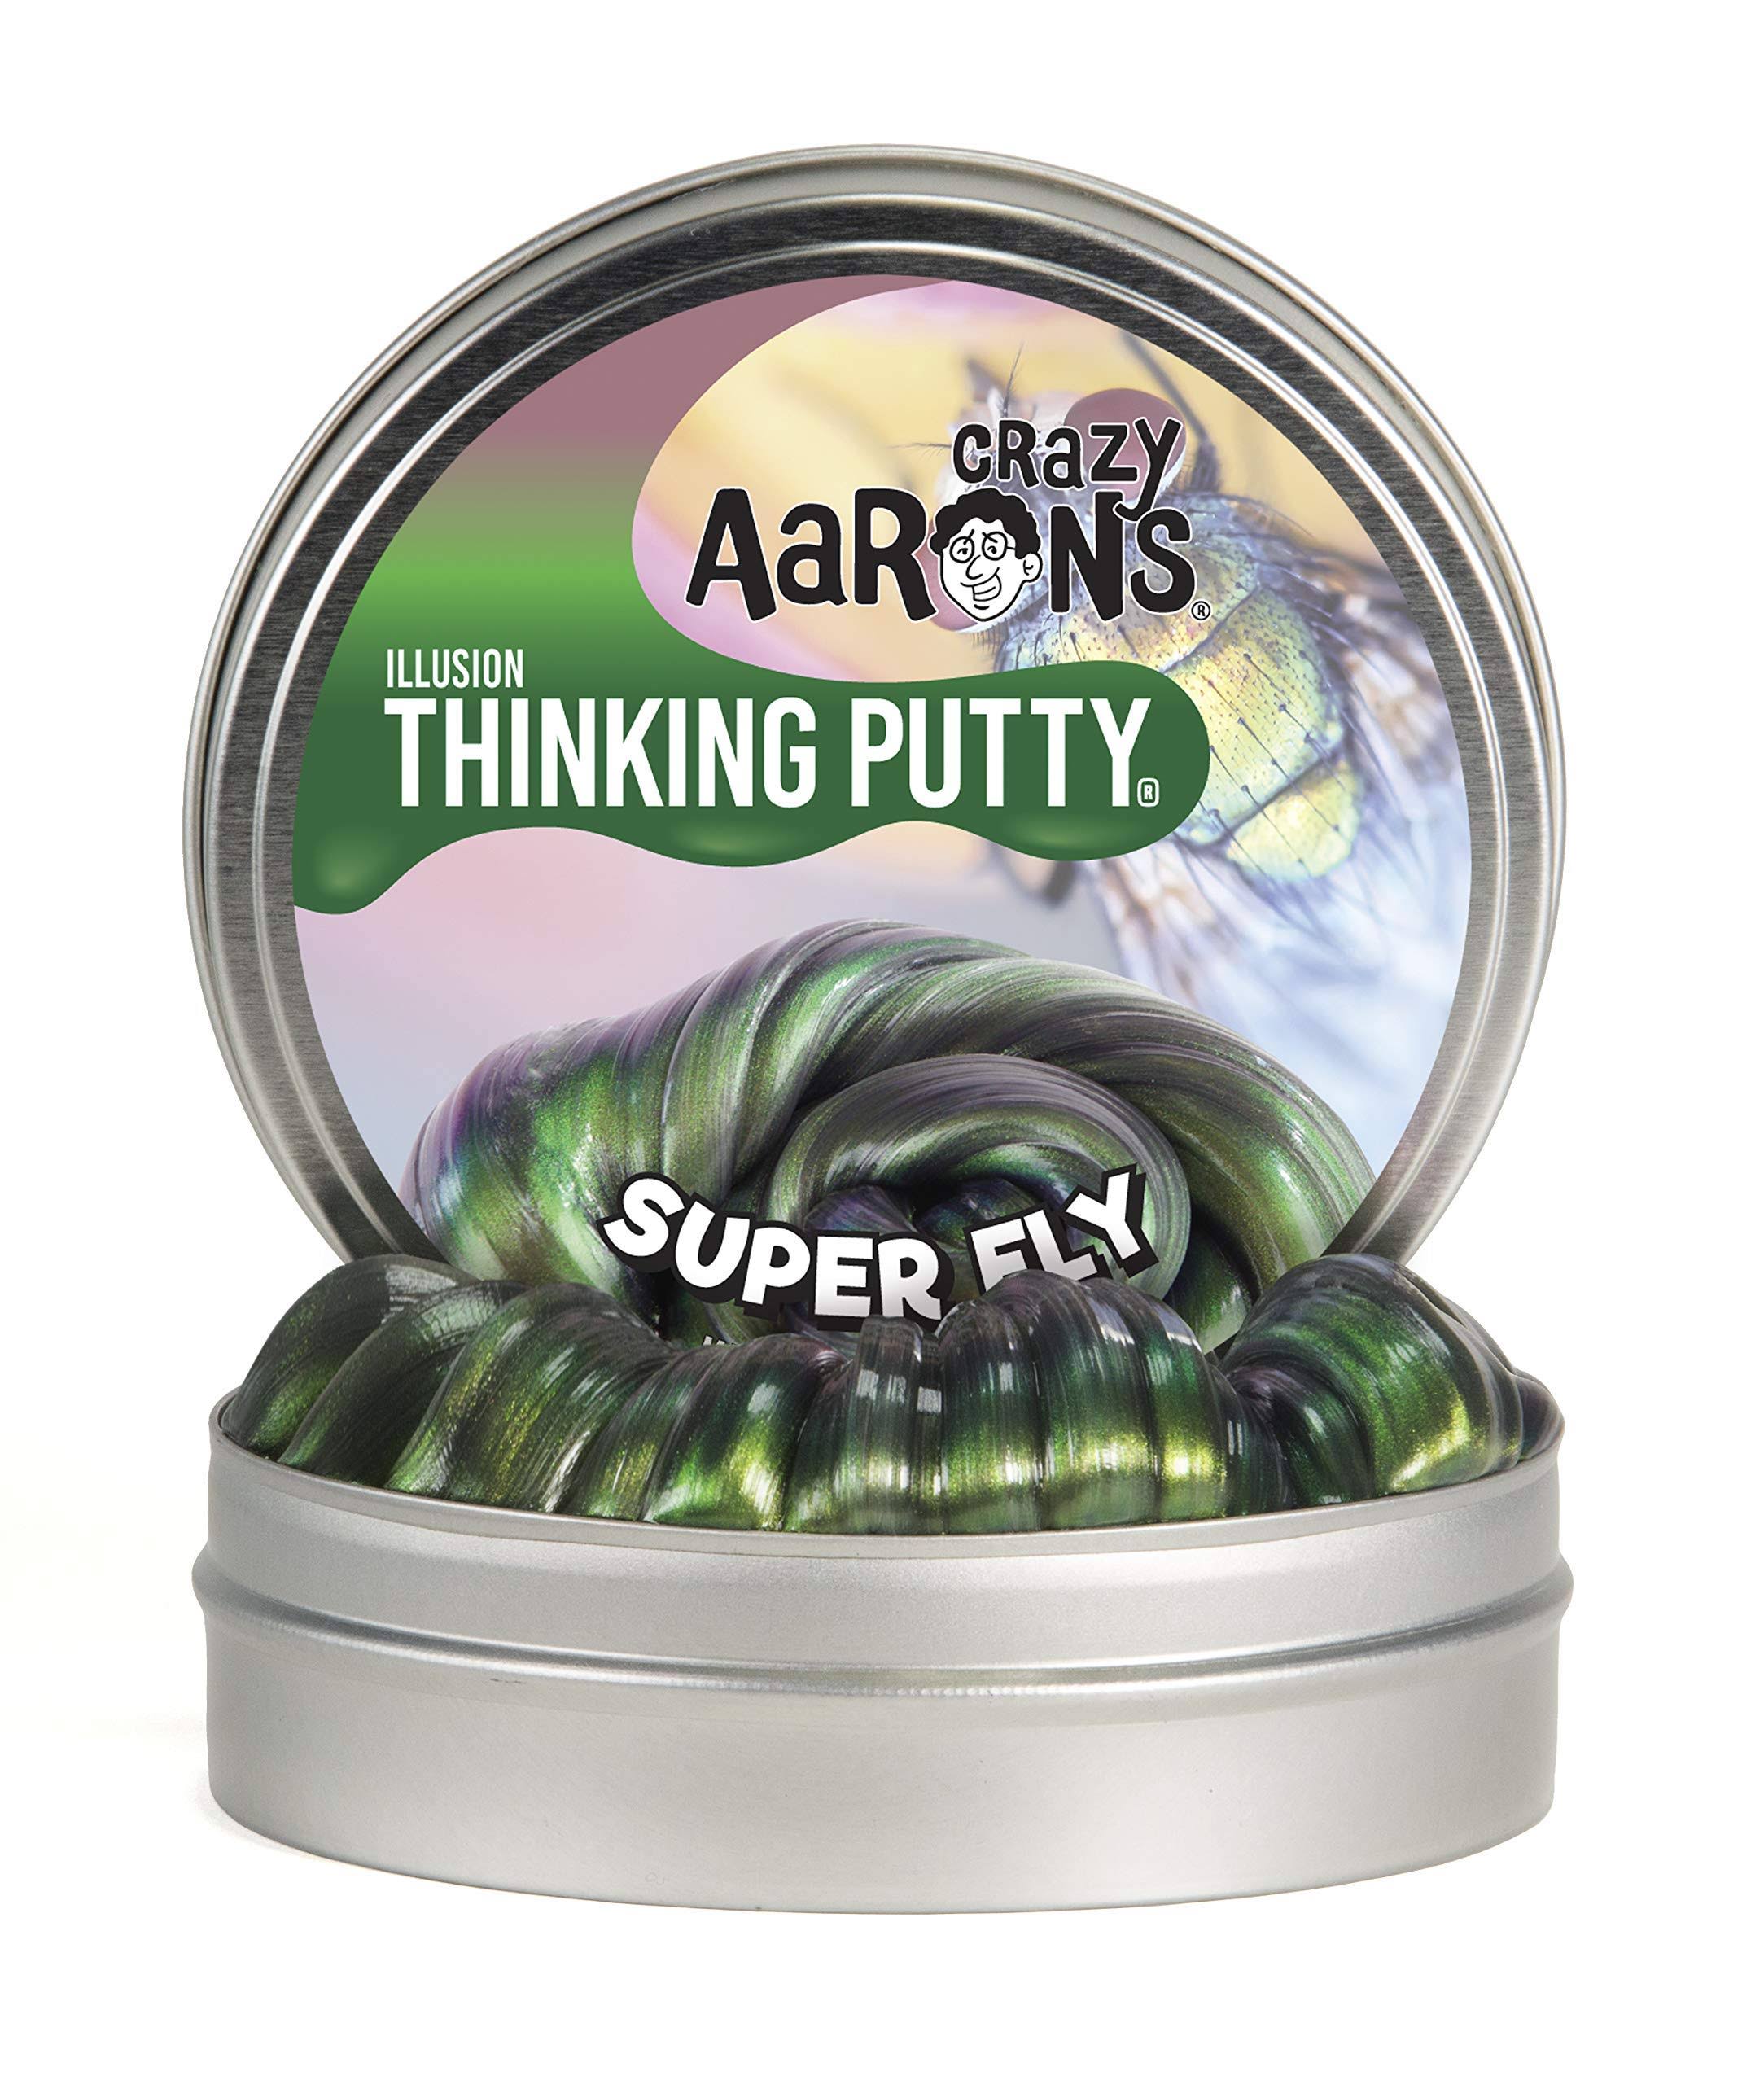 Crazy Aarons Thinking Putty Super Fly 4 Inch